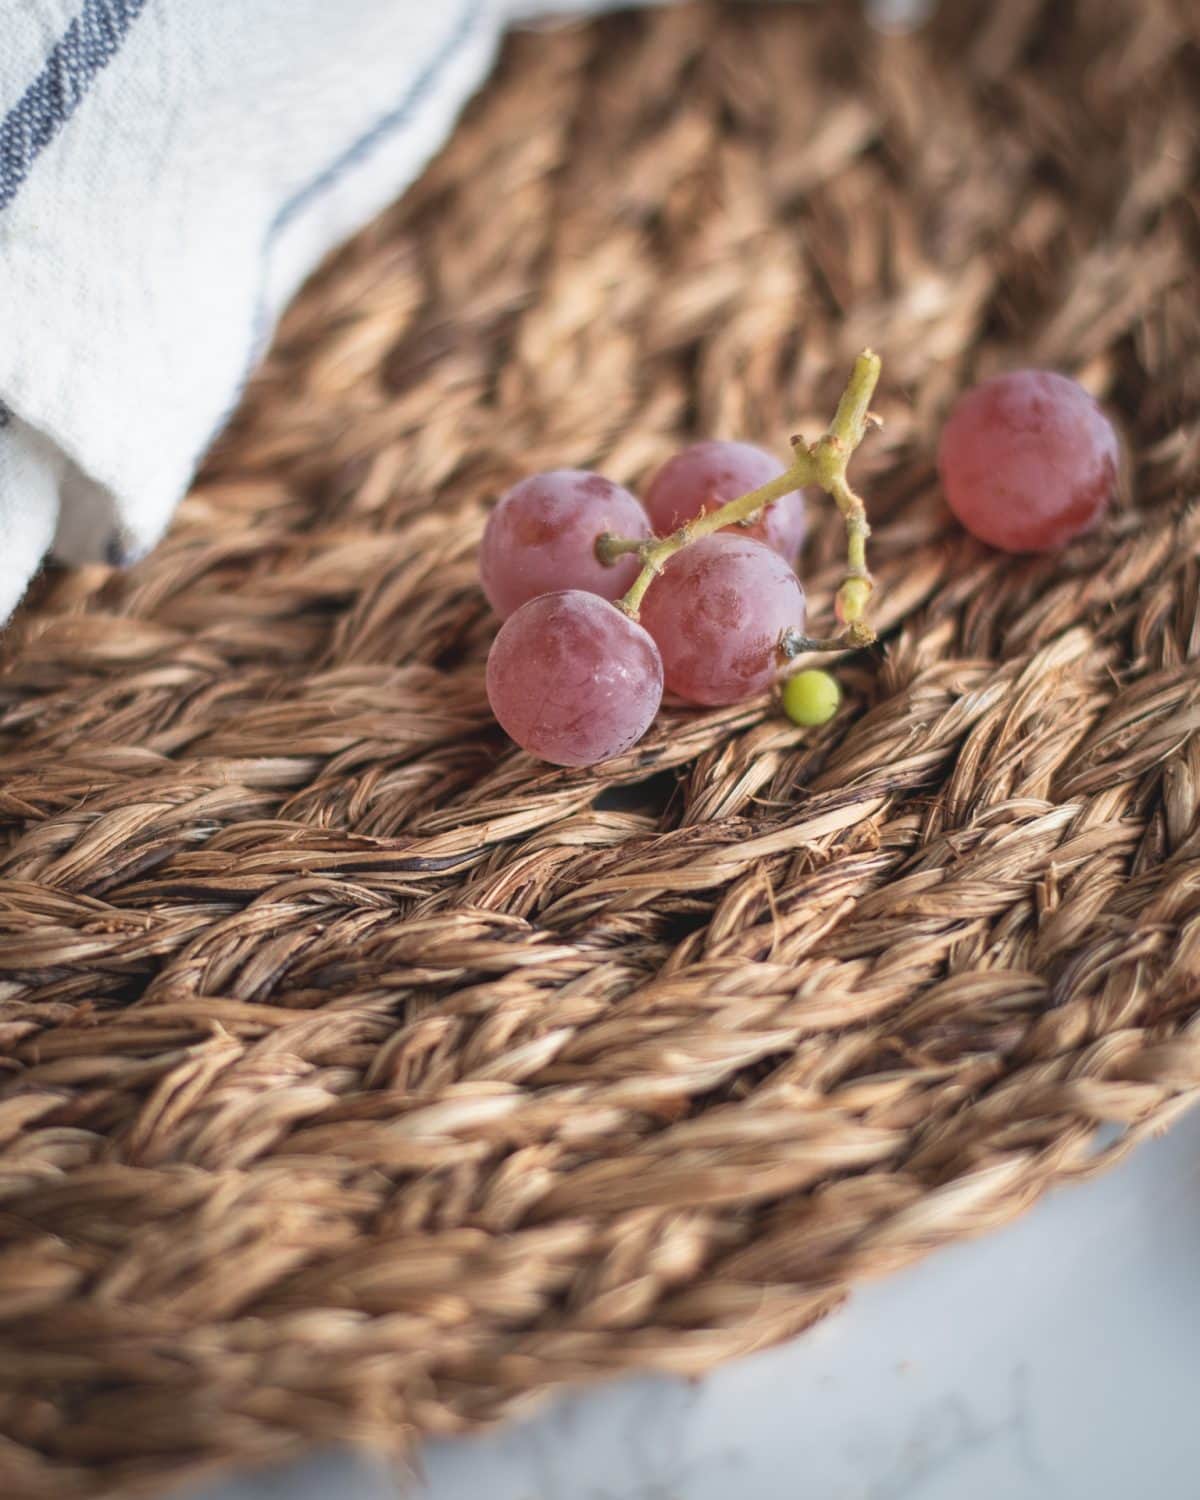 Red grapes on a wicker placemat